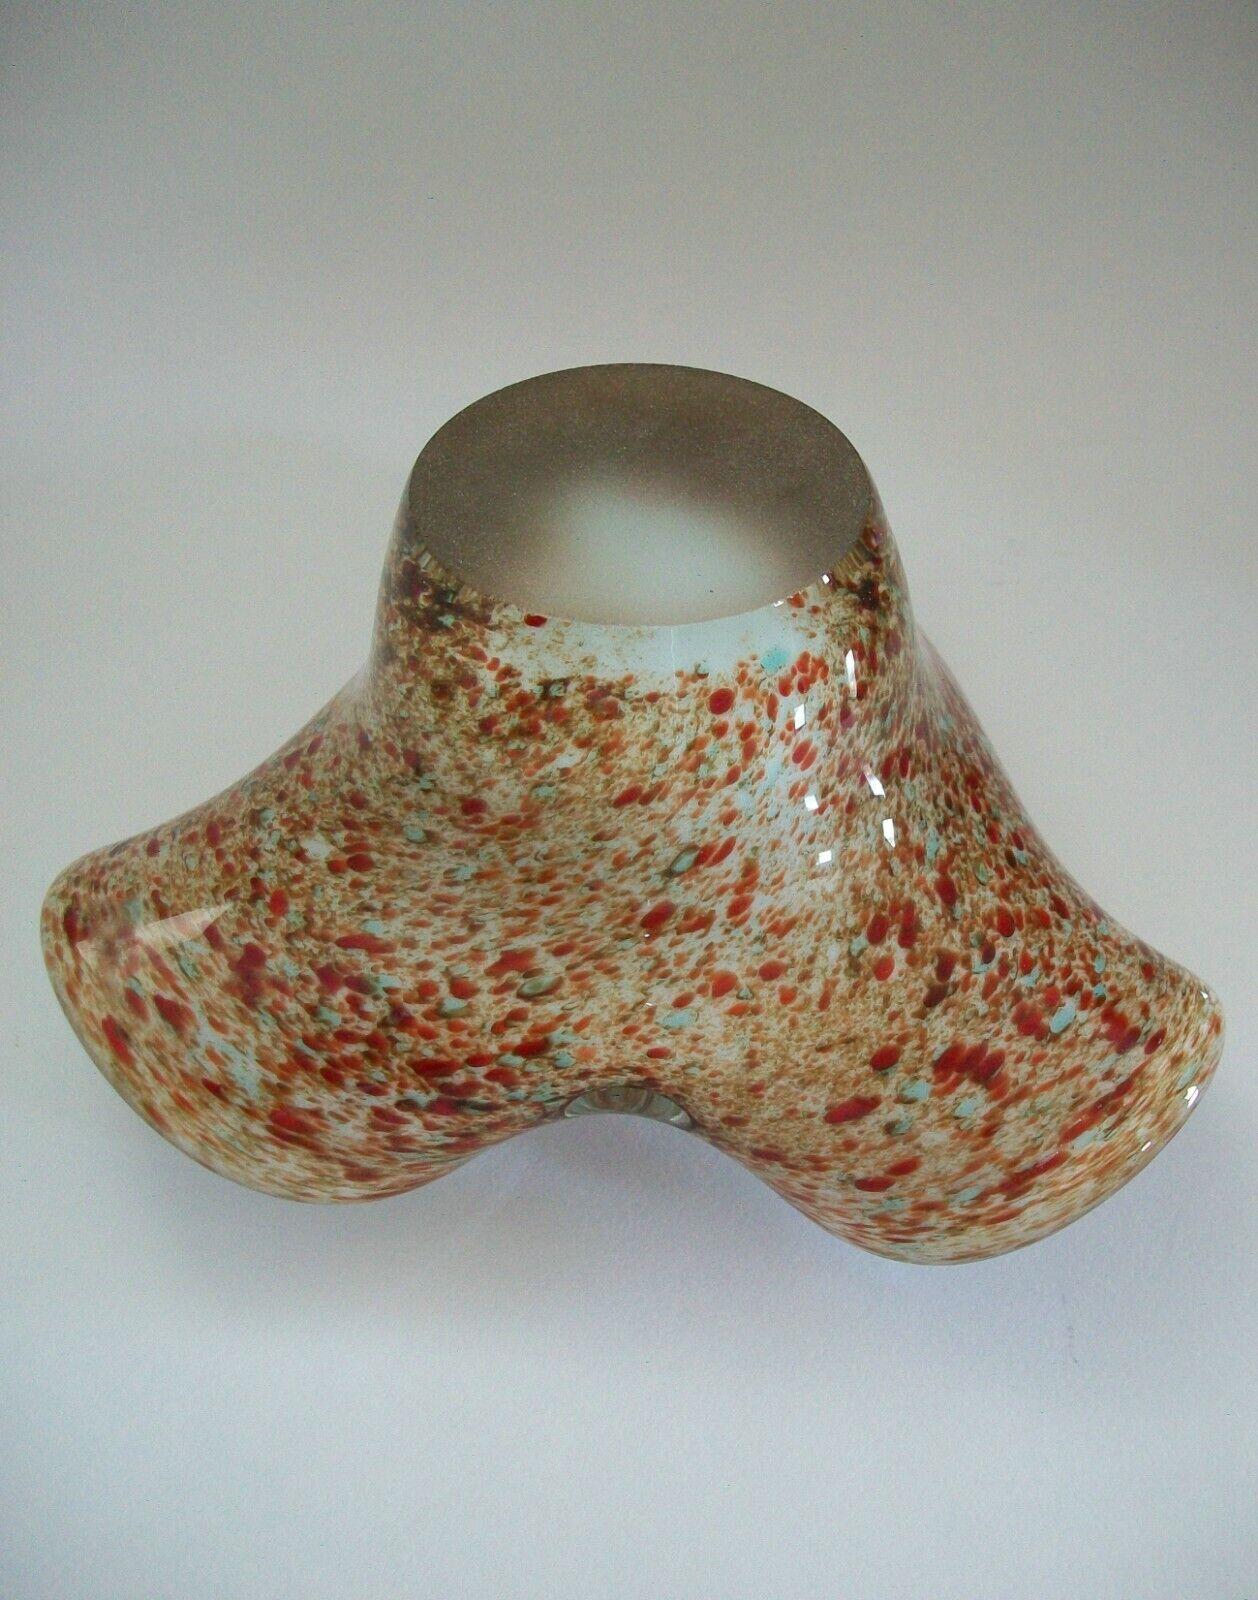 Midcentury Murano Trefoil Speckled Glass Bowl - Unsigned - Italy - circa 1970s For Sale 3